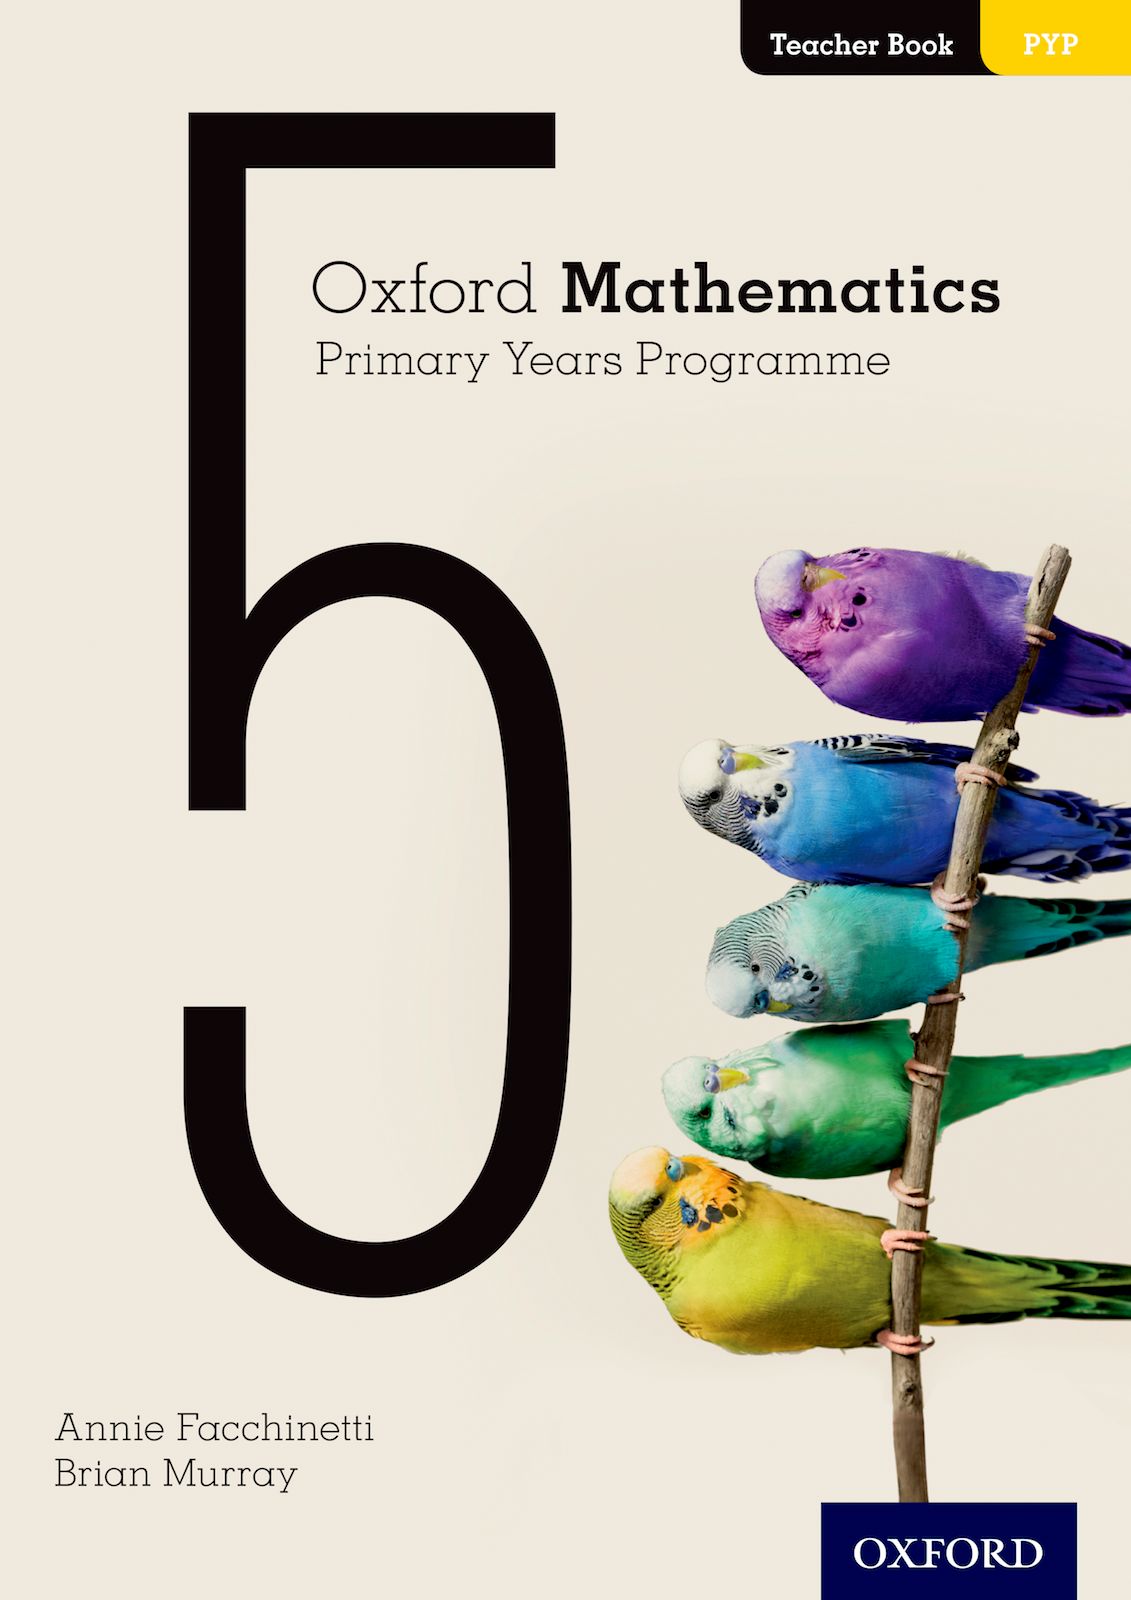 Featured image for “Oxford Mathematics Primary Years Programme Teacher Book 5”